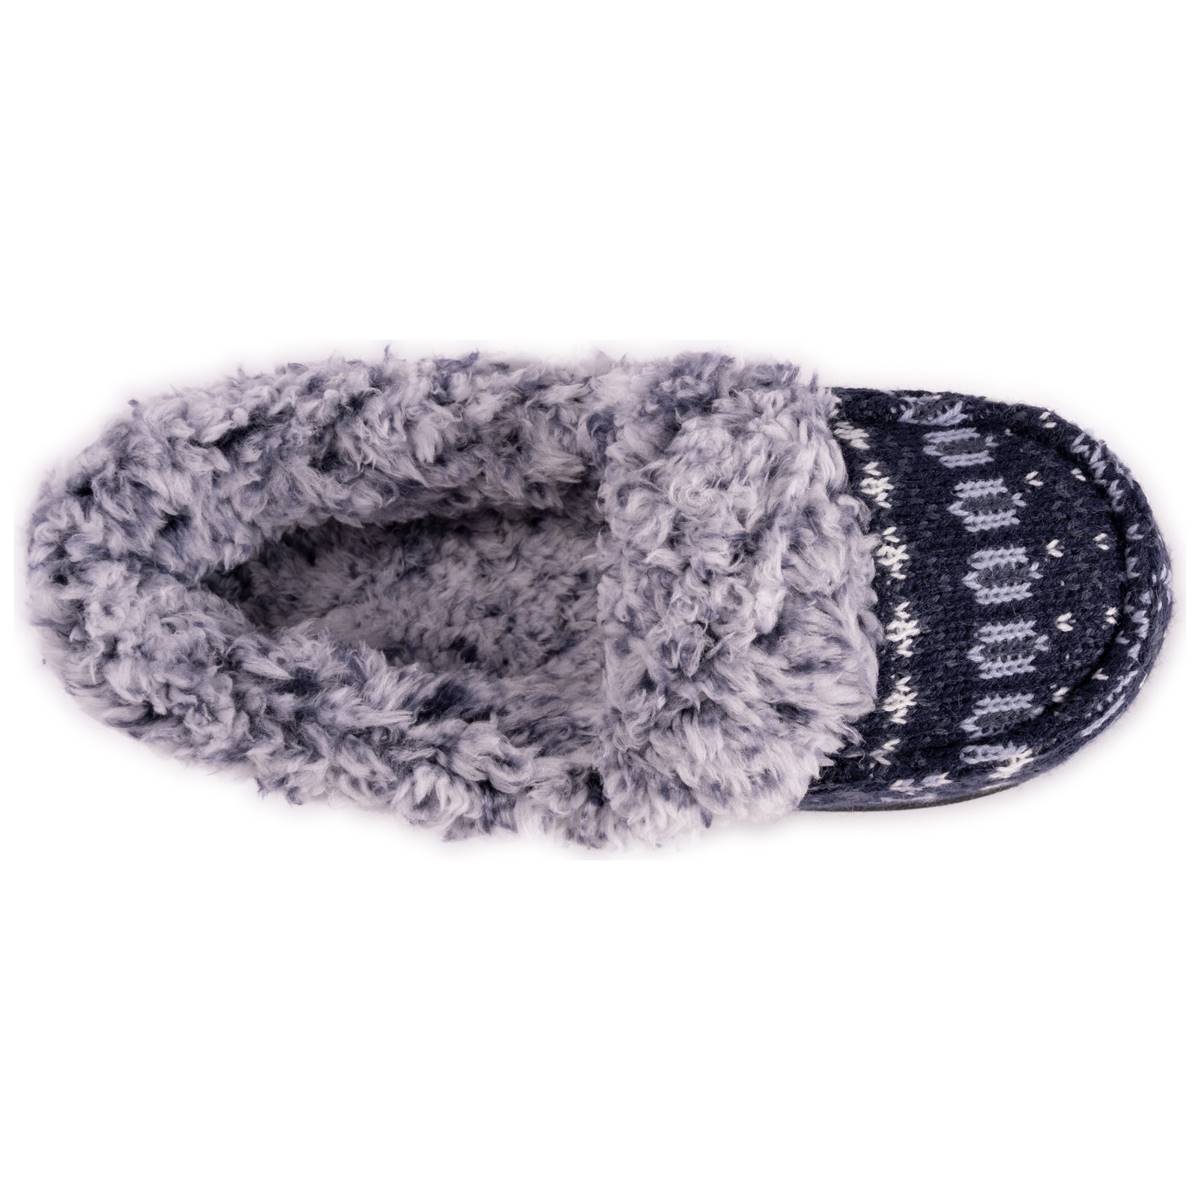 Womens MUK LUKS(R) Anais Moccasin Slippers